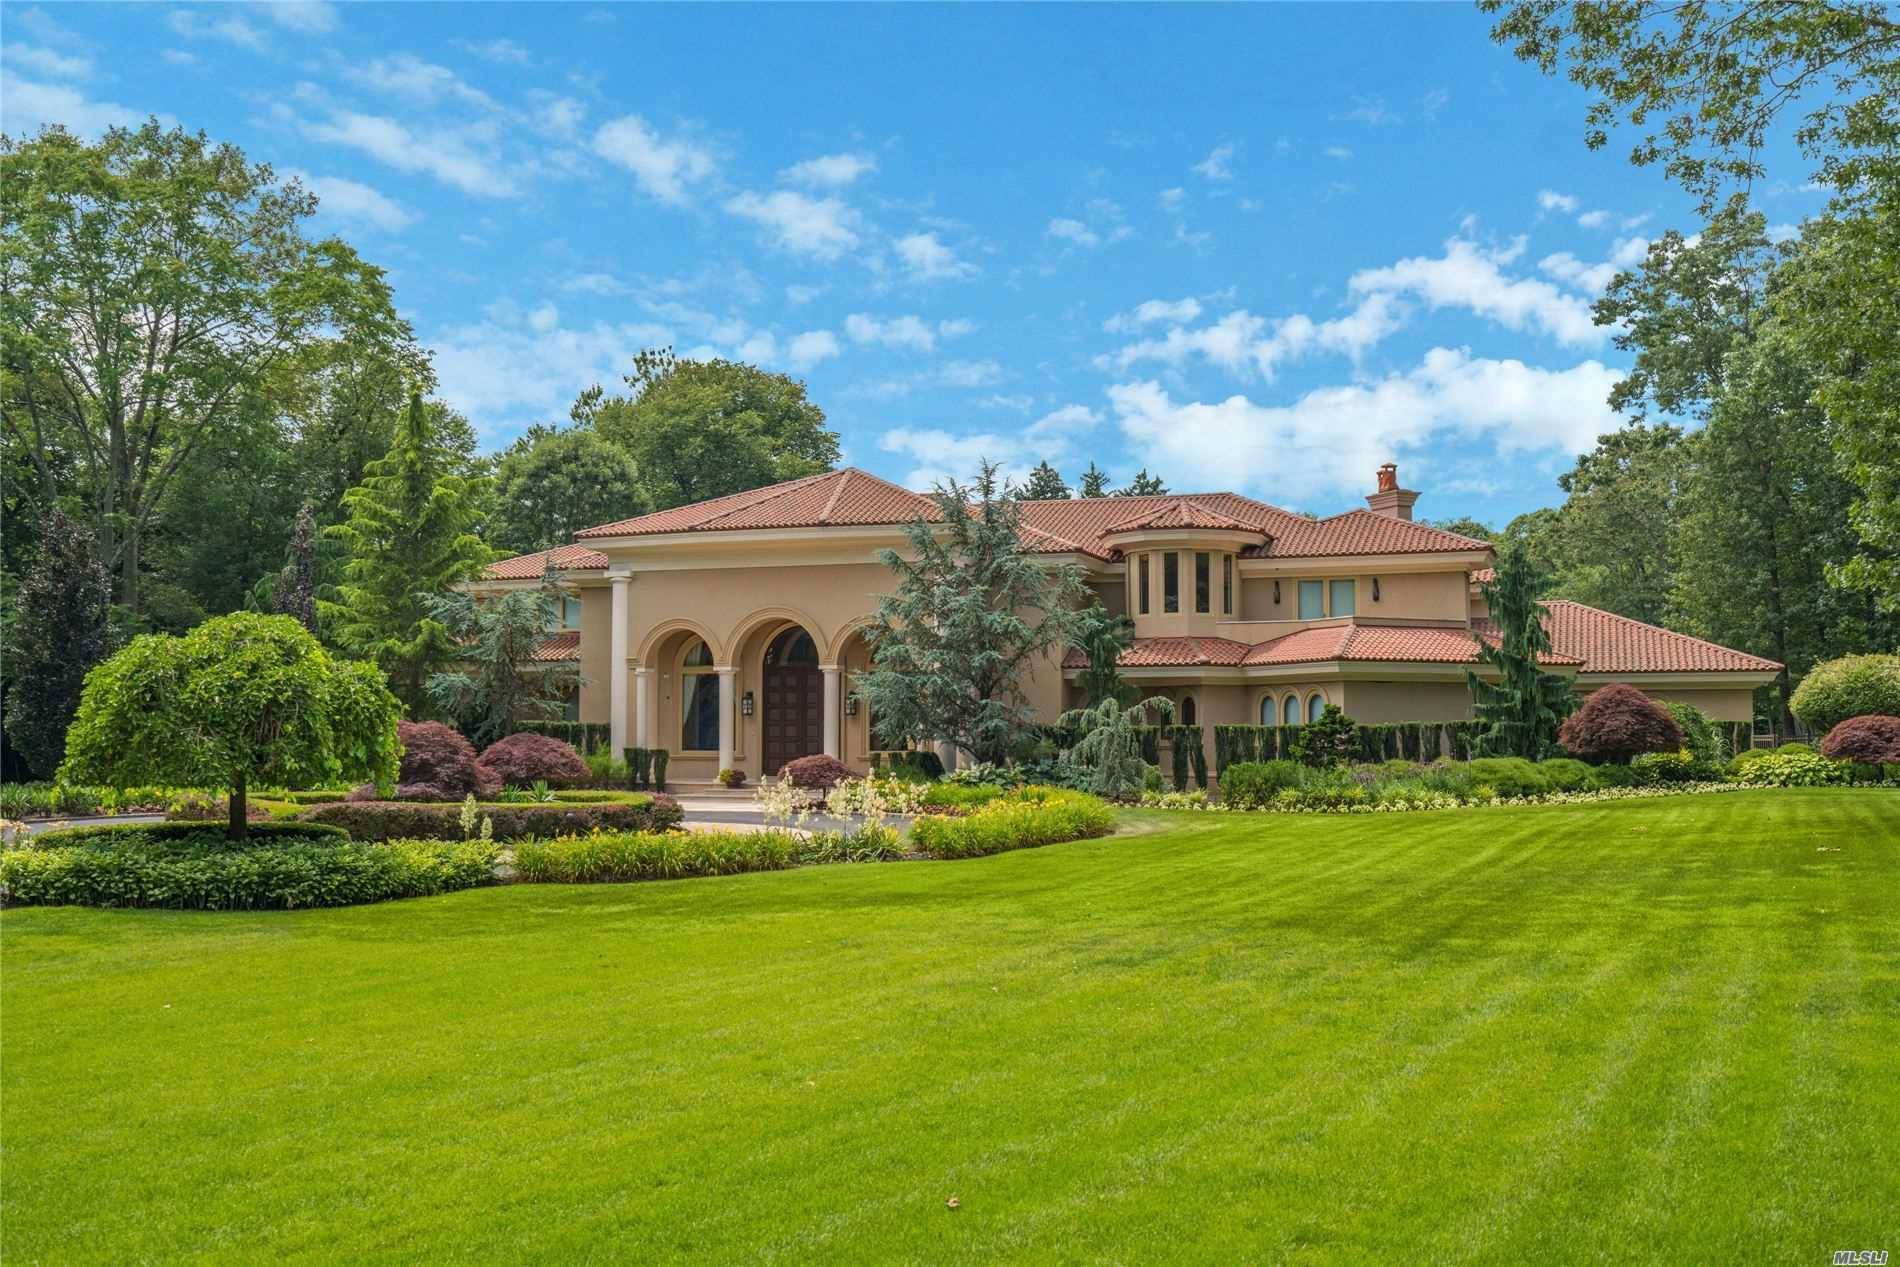 Experience The Rewards Of An Elevated Long Island Lifestyle In This Rare Offering Set On 5 Magnificent Acres In The Renowned Village Of Old Westbury.